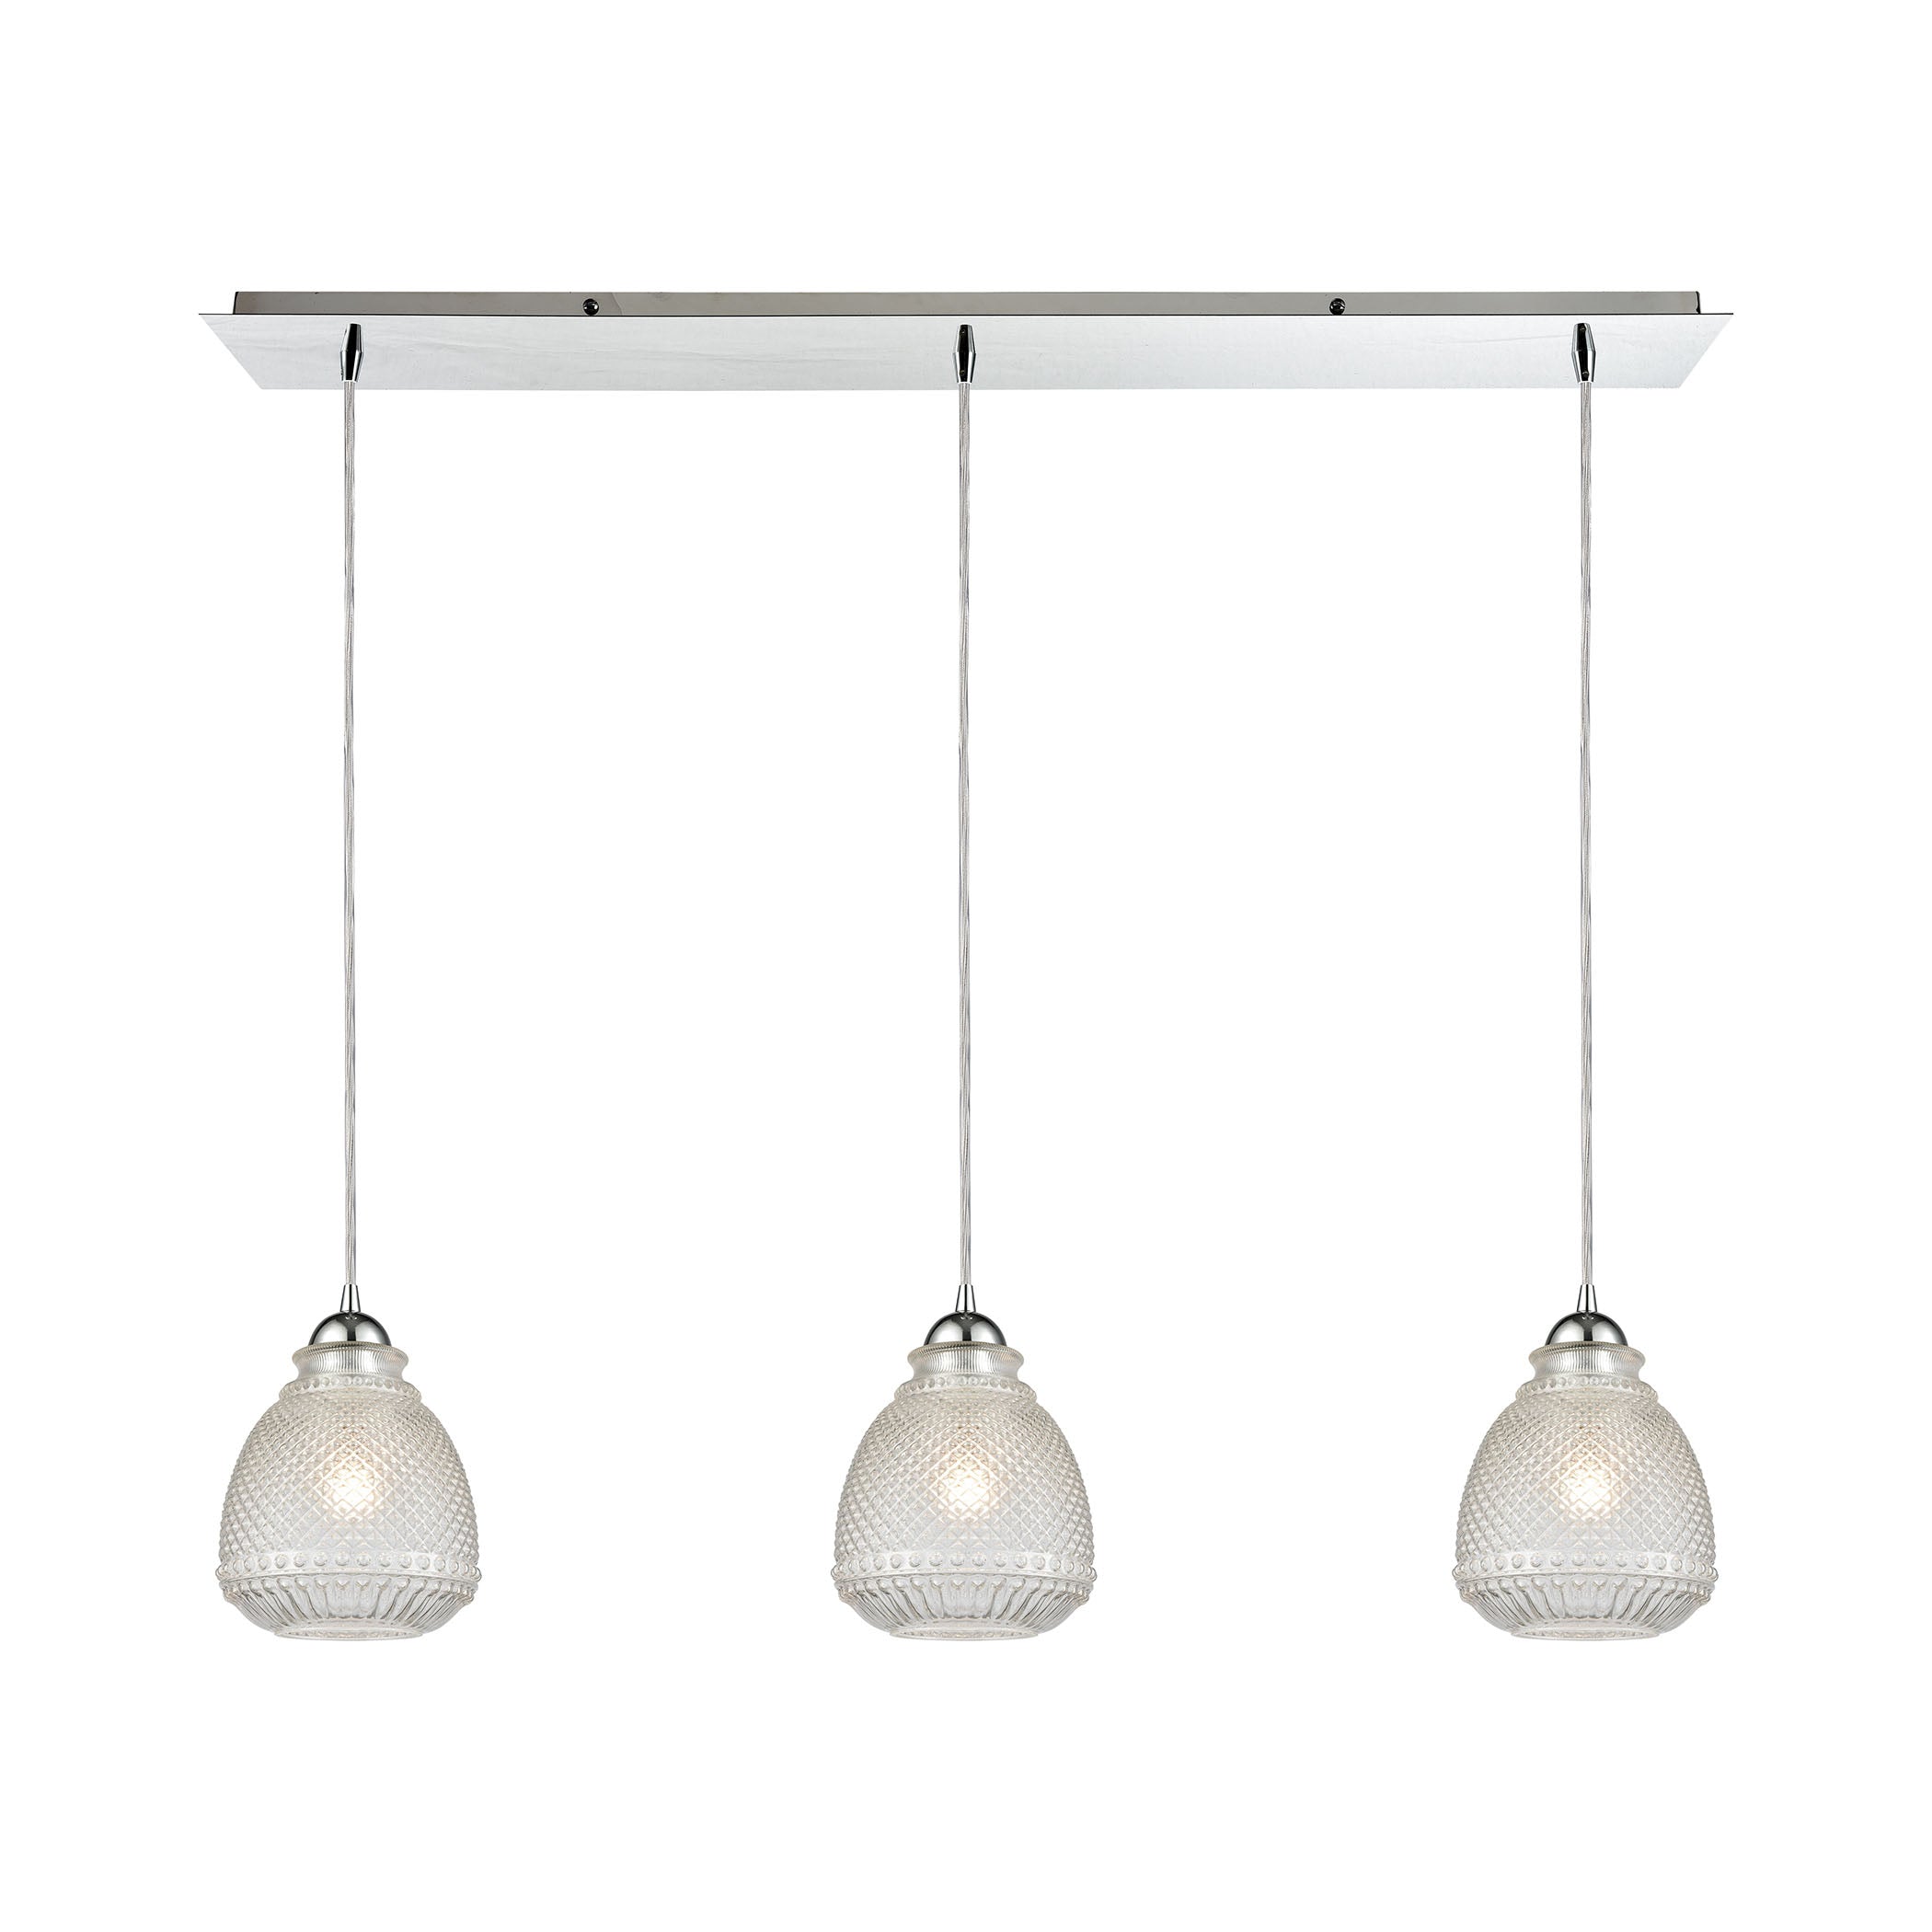 ELK Lighting 56590/3LP Victoriana 3-Light Linear Mini Pendant Fixture in Polished Chrome with Clear Crosshatched Glass